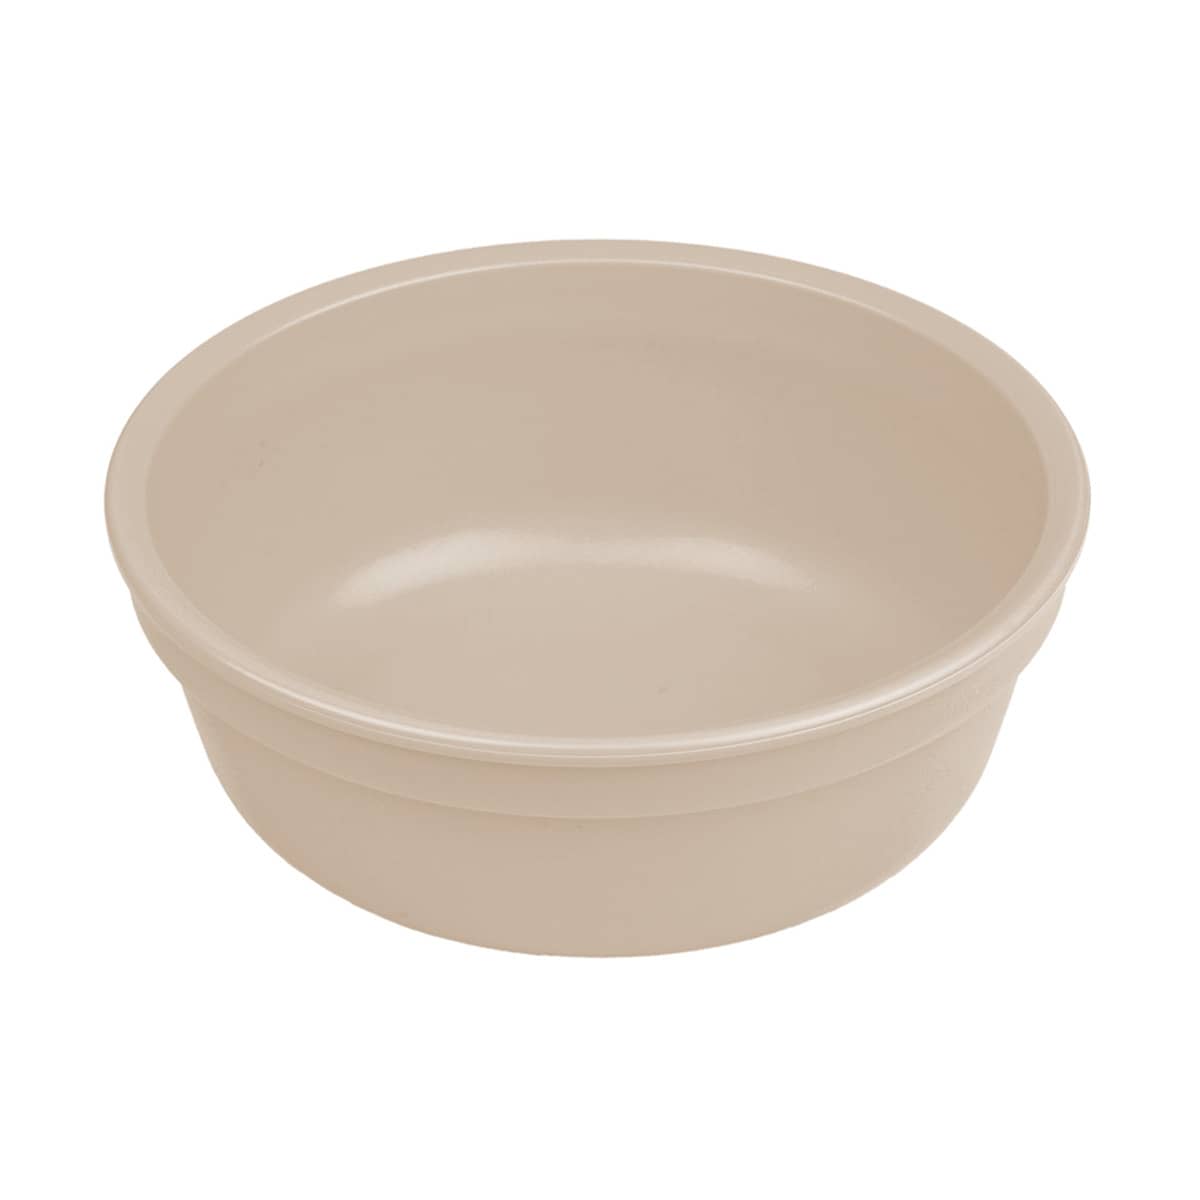 Re-Play Recycled Bowl - Naturals Collection - Sand